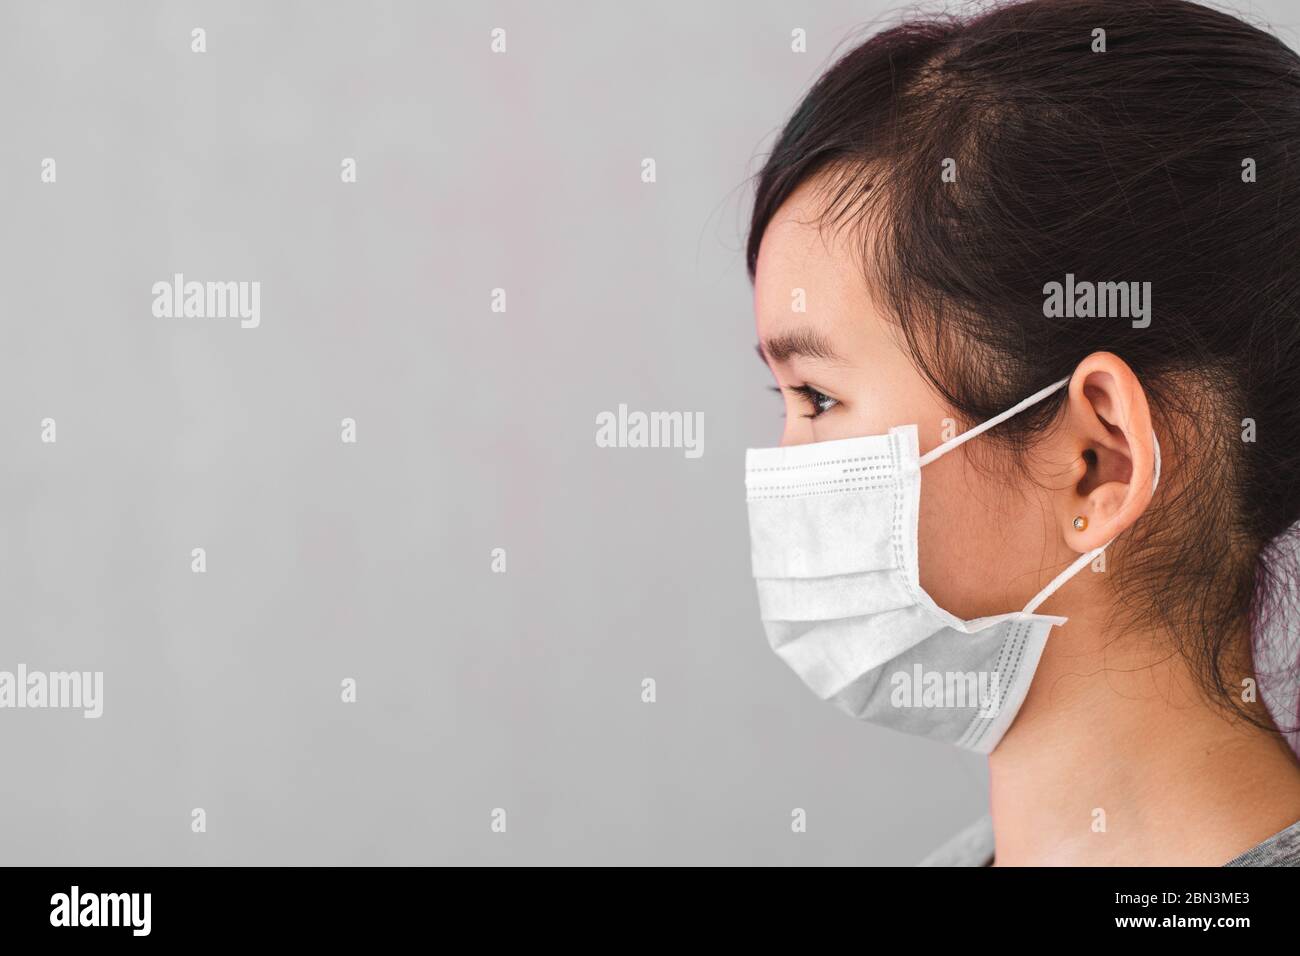 Little asian girl wearing sterile medical mask for protect Covid-19 isolated on gray background. Copy space. Stock Photo